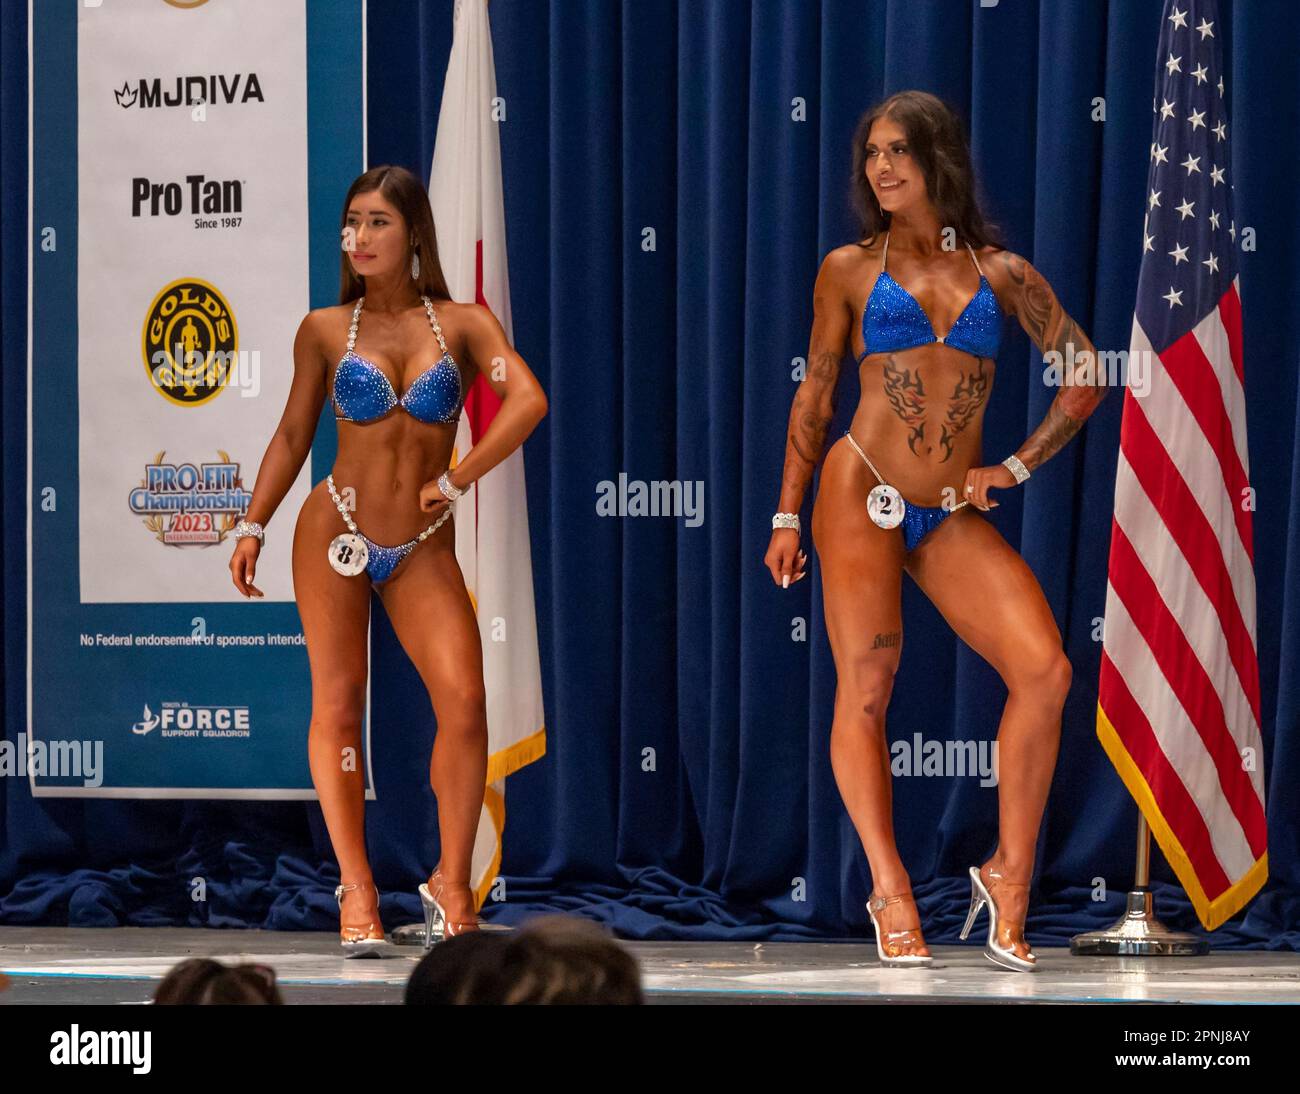 Yokota, Japan. 16 April, 2023. Two female bodybuilders pose on stage during the 2023 US - Japan Friendship Cup bodybuilding contest hosted by the 374th Force Support Squadron at Yokota Air Base, April 16, 2023 in Western Tokyo, Japan. Credit: A1C Jarrett Smith/U.S. Air Force/Alamy Live News Stock Photo